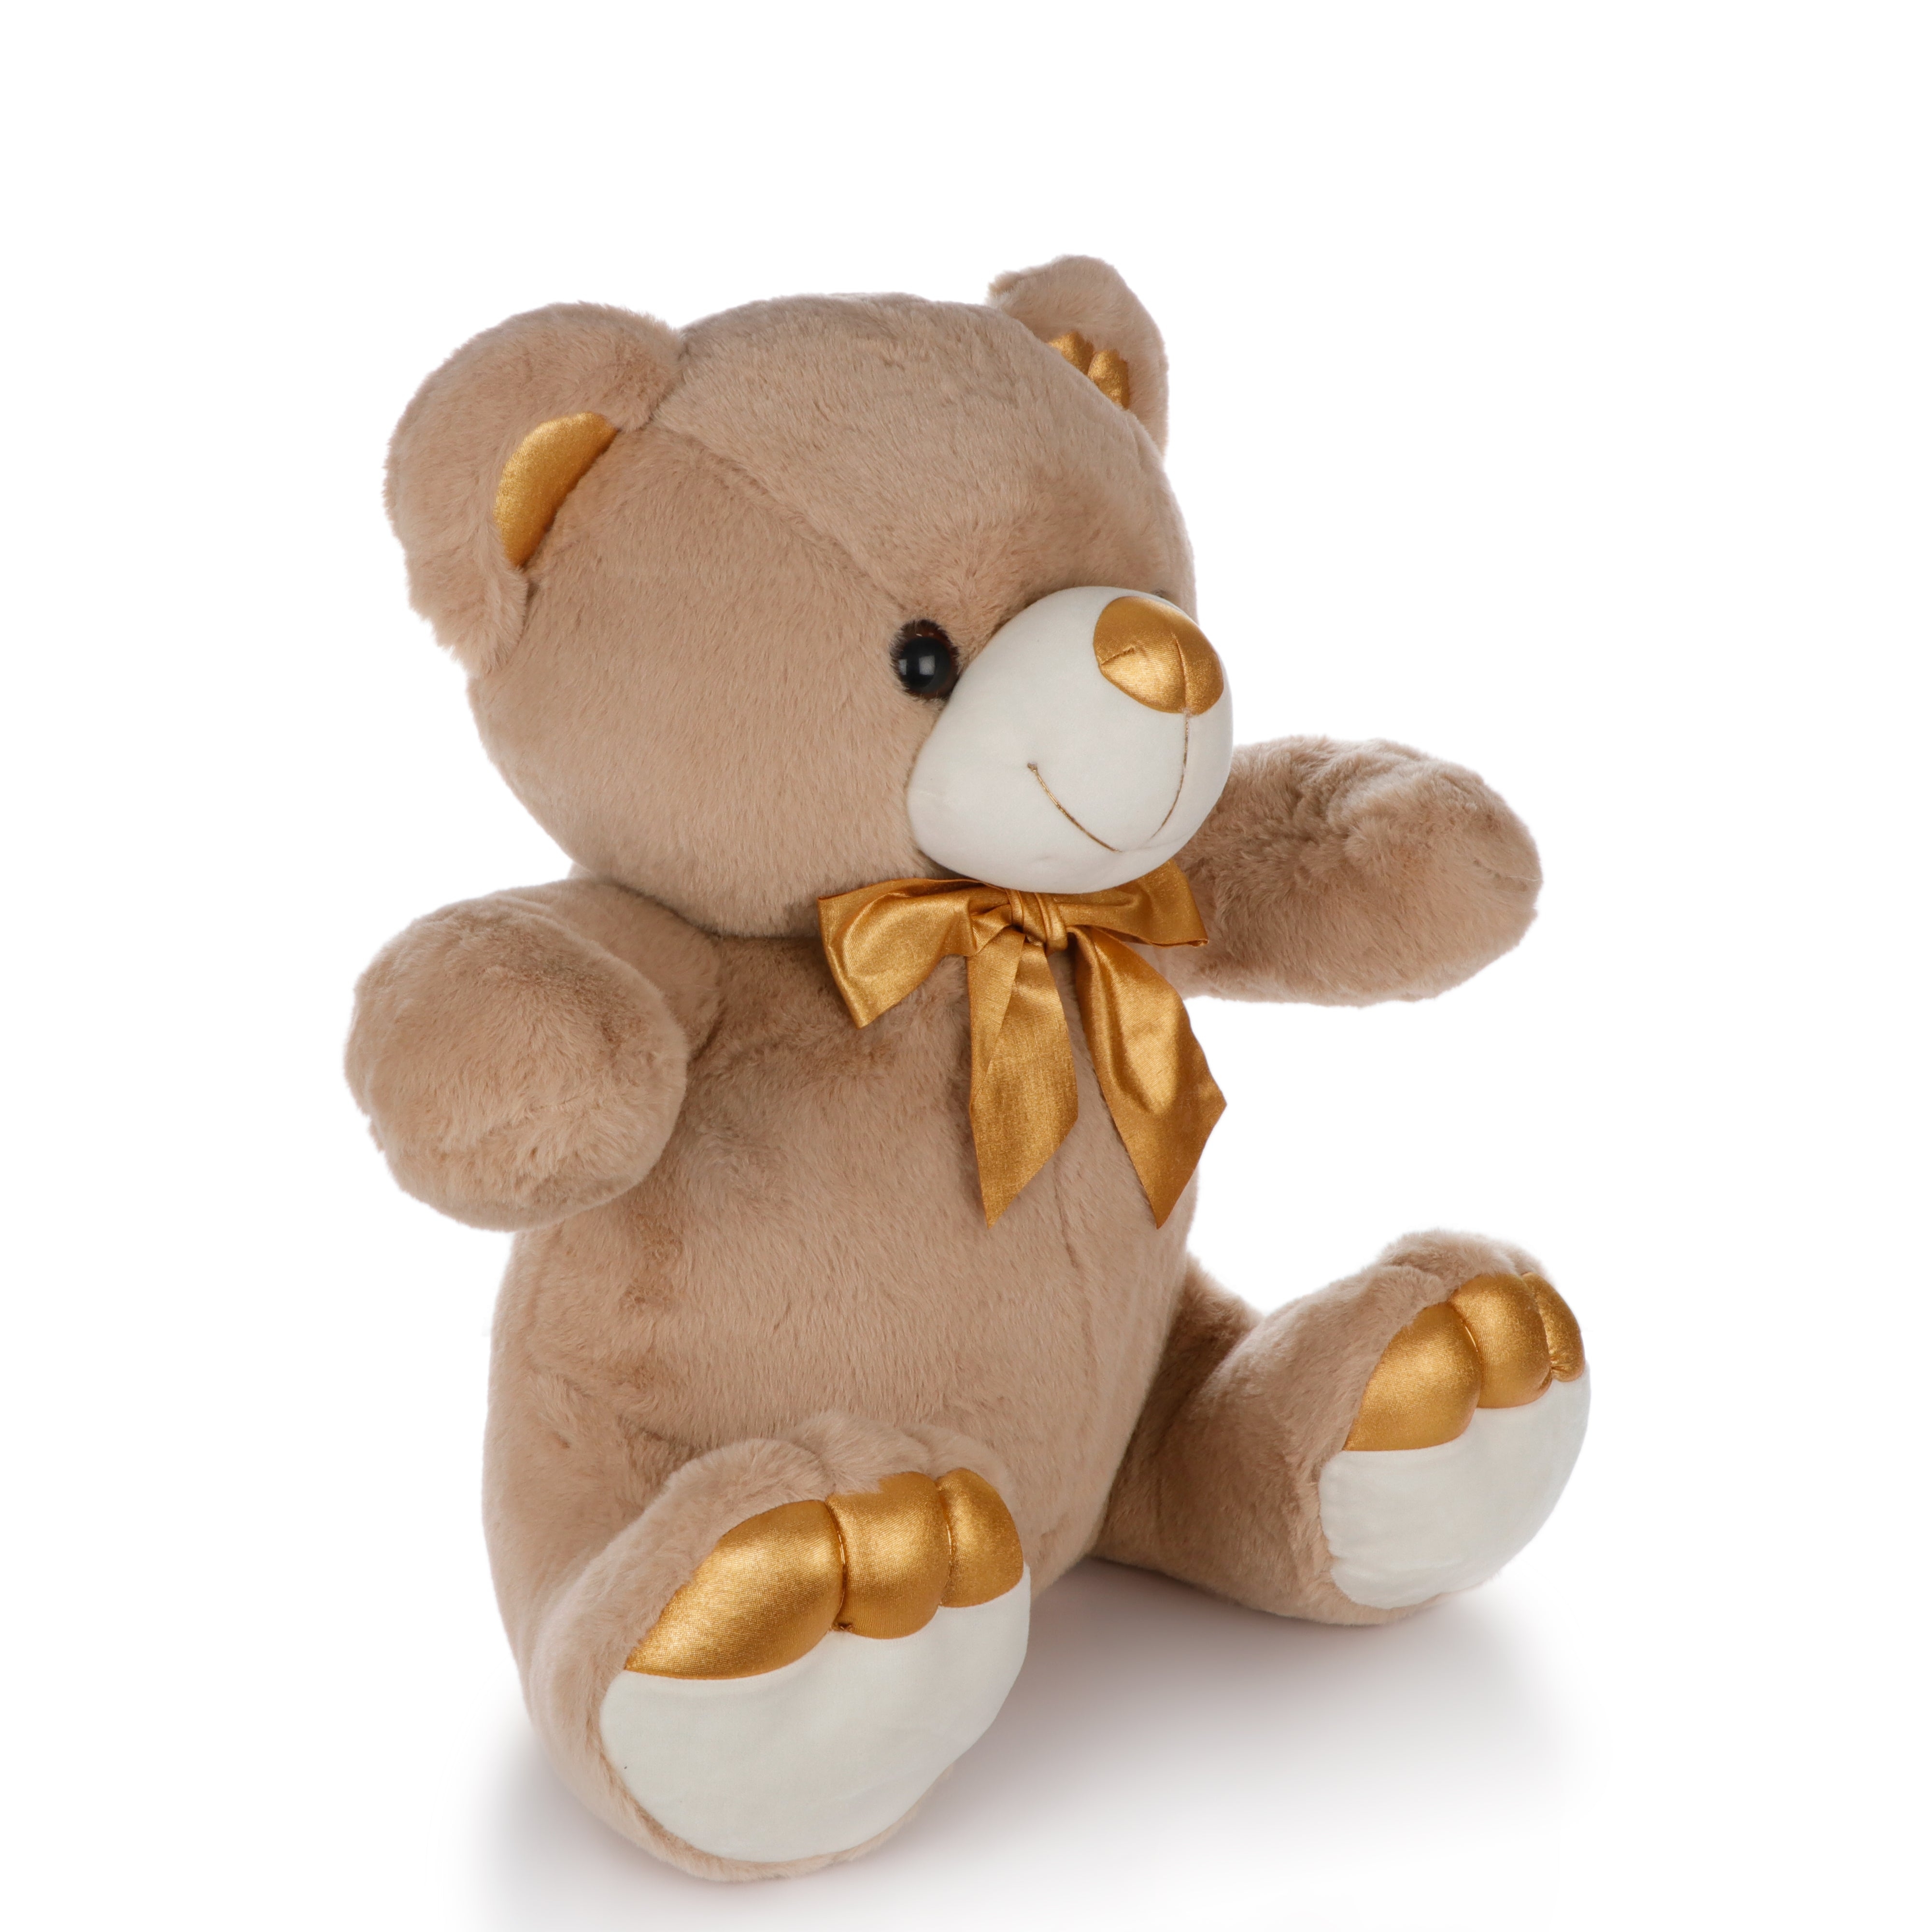 Archies | Archies Soft Toys, Teddy Bear For Girls, Soft Toys Boyfriend, Husband For Kids, Birthday Gift For Girls,Wife,   Brown Teddy Bear with Golden Paws - 50CM 1